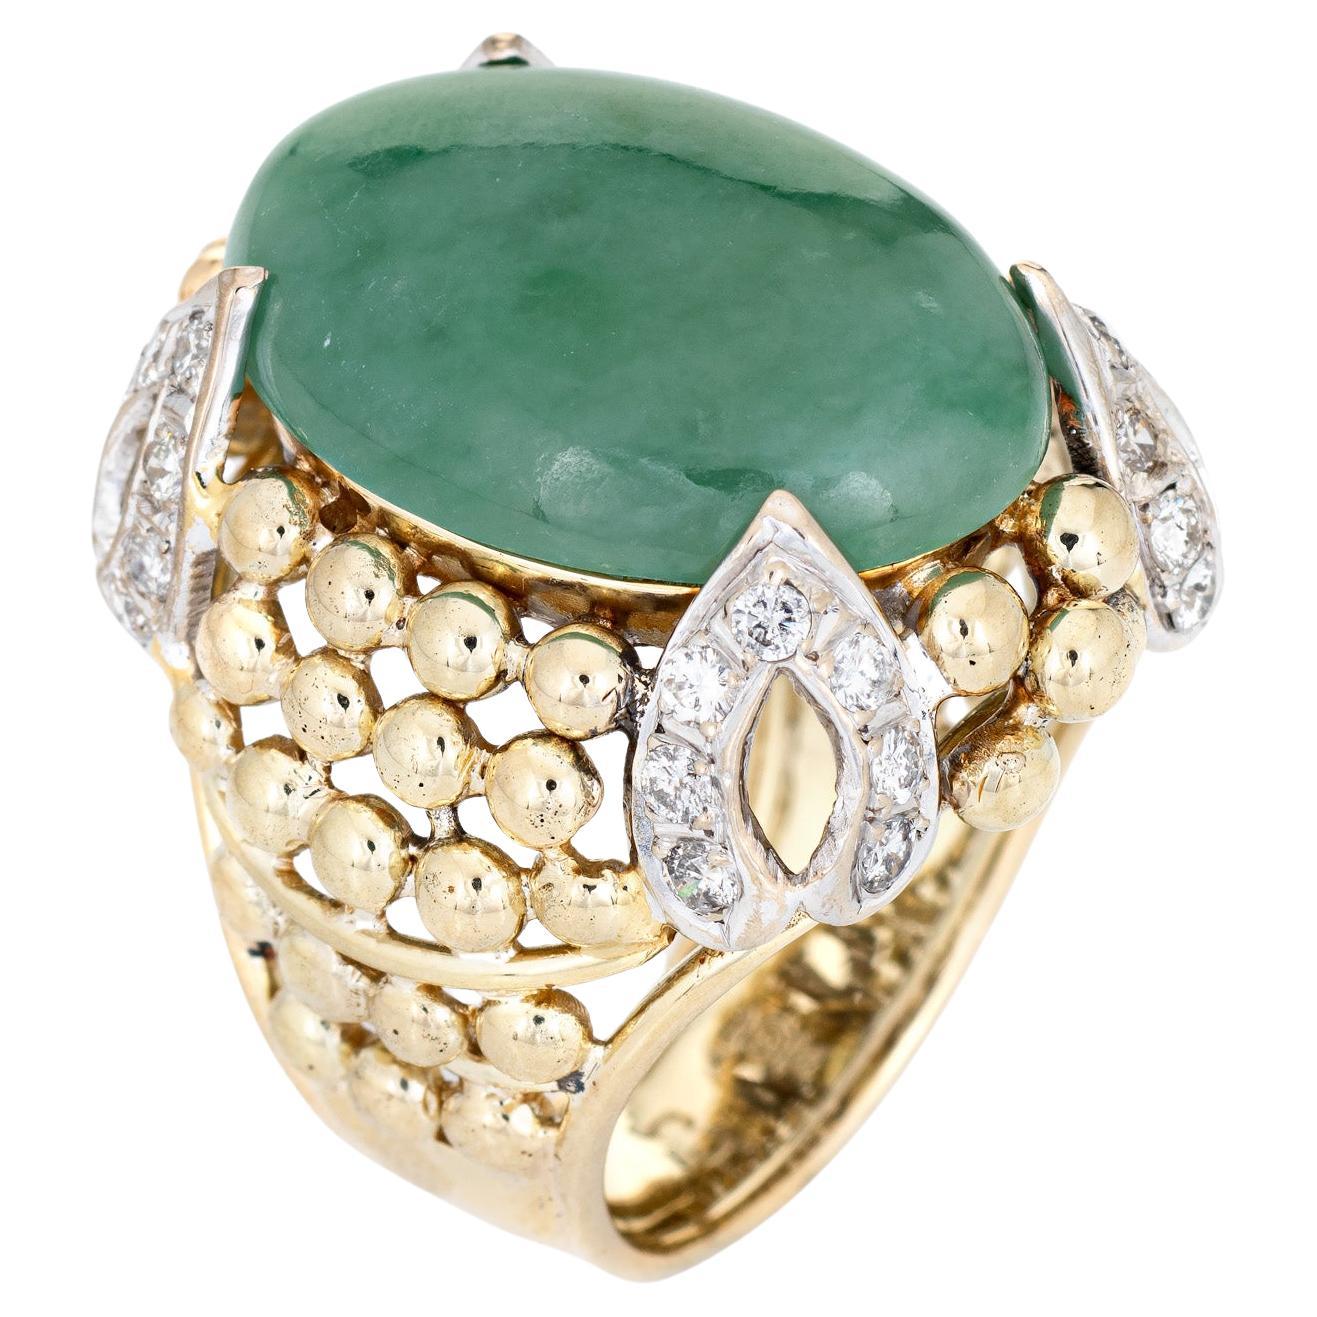 Large Jade Diamond Ring Vintage 60s Cocktail Jewelry 18k Yellow Gold